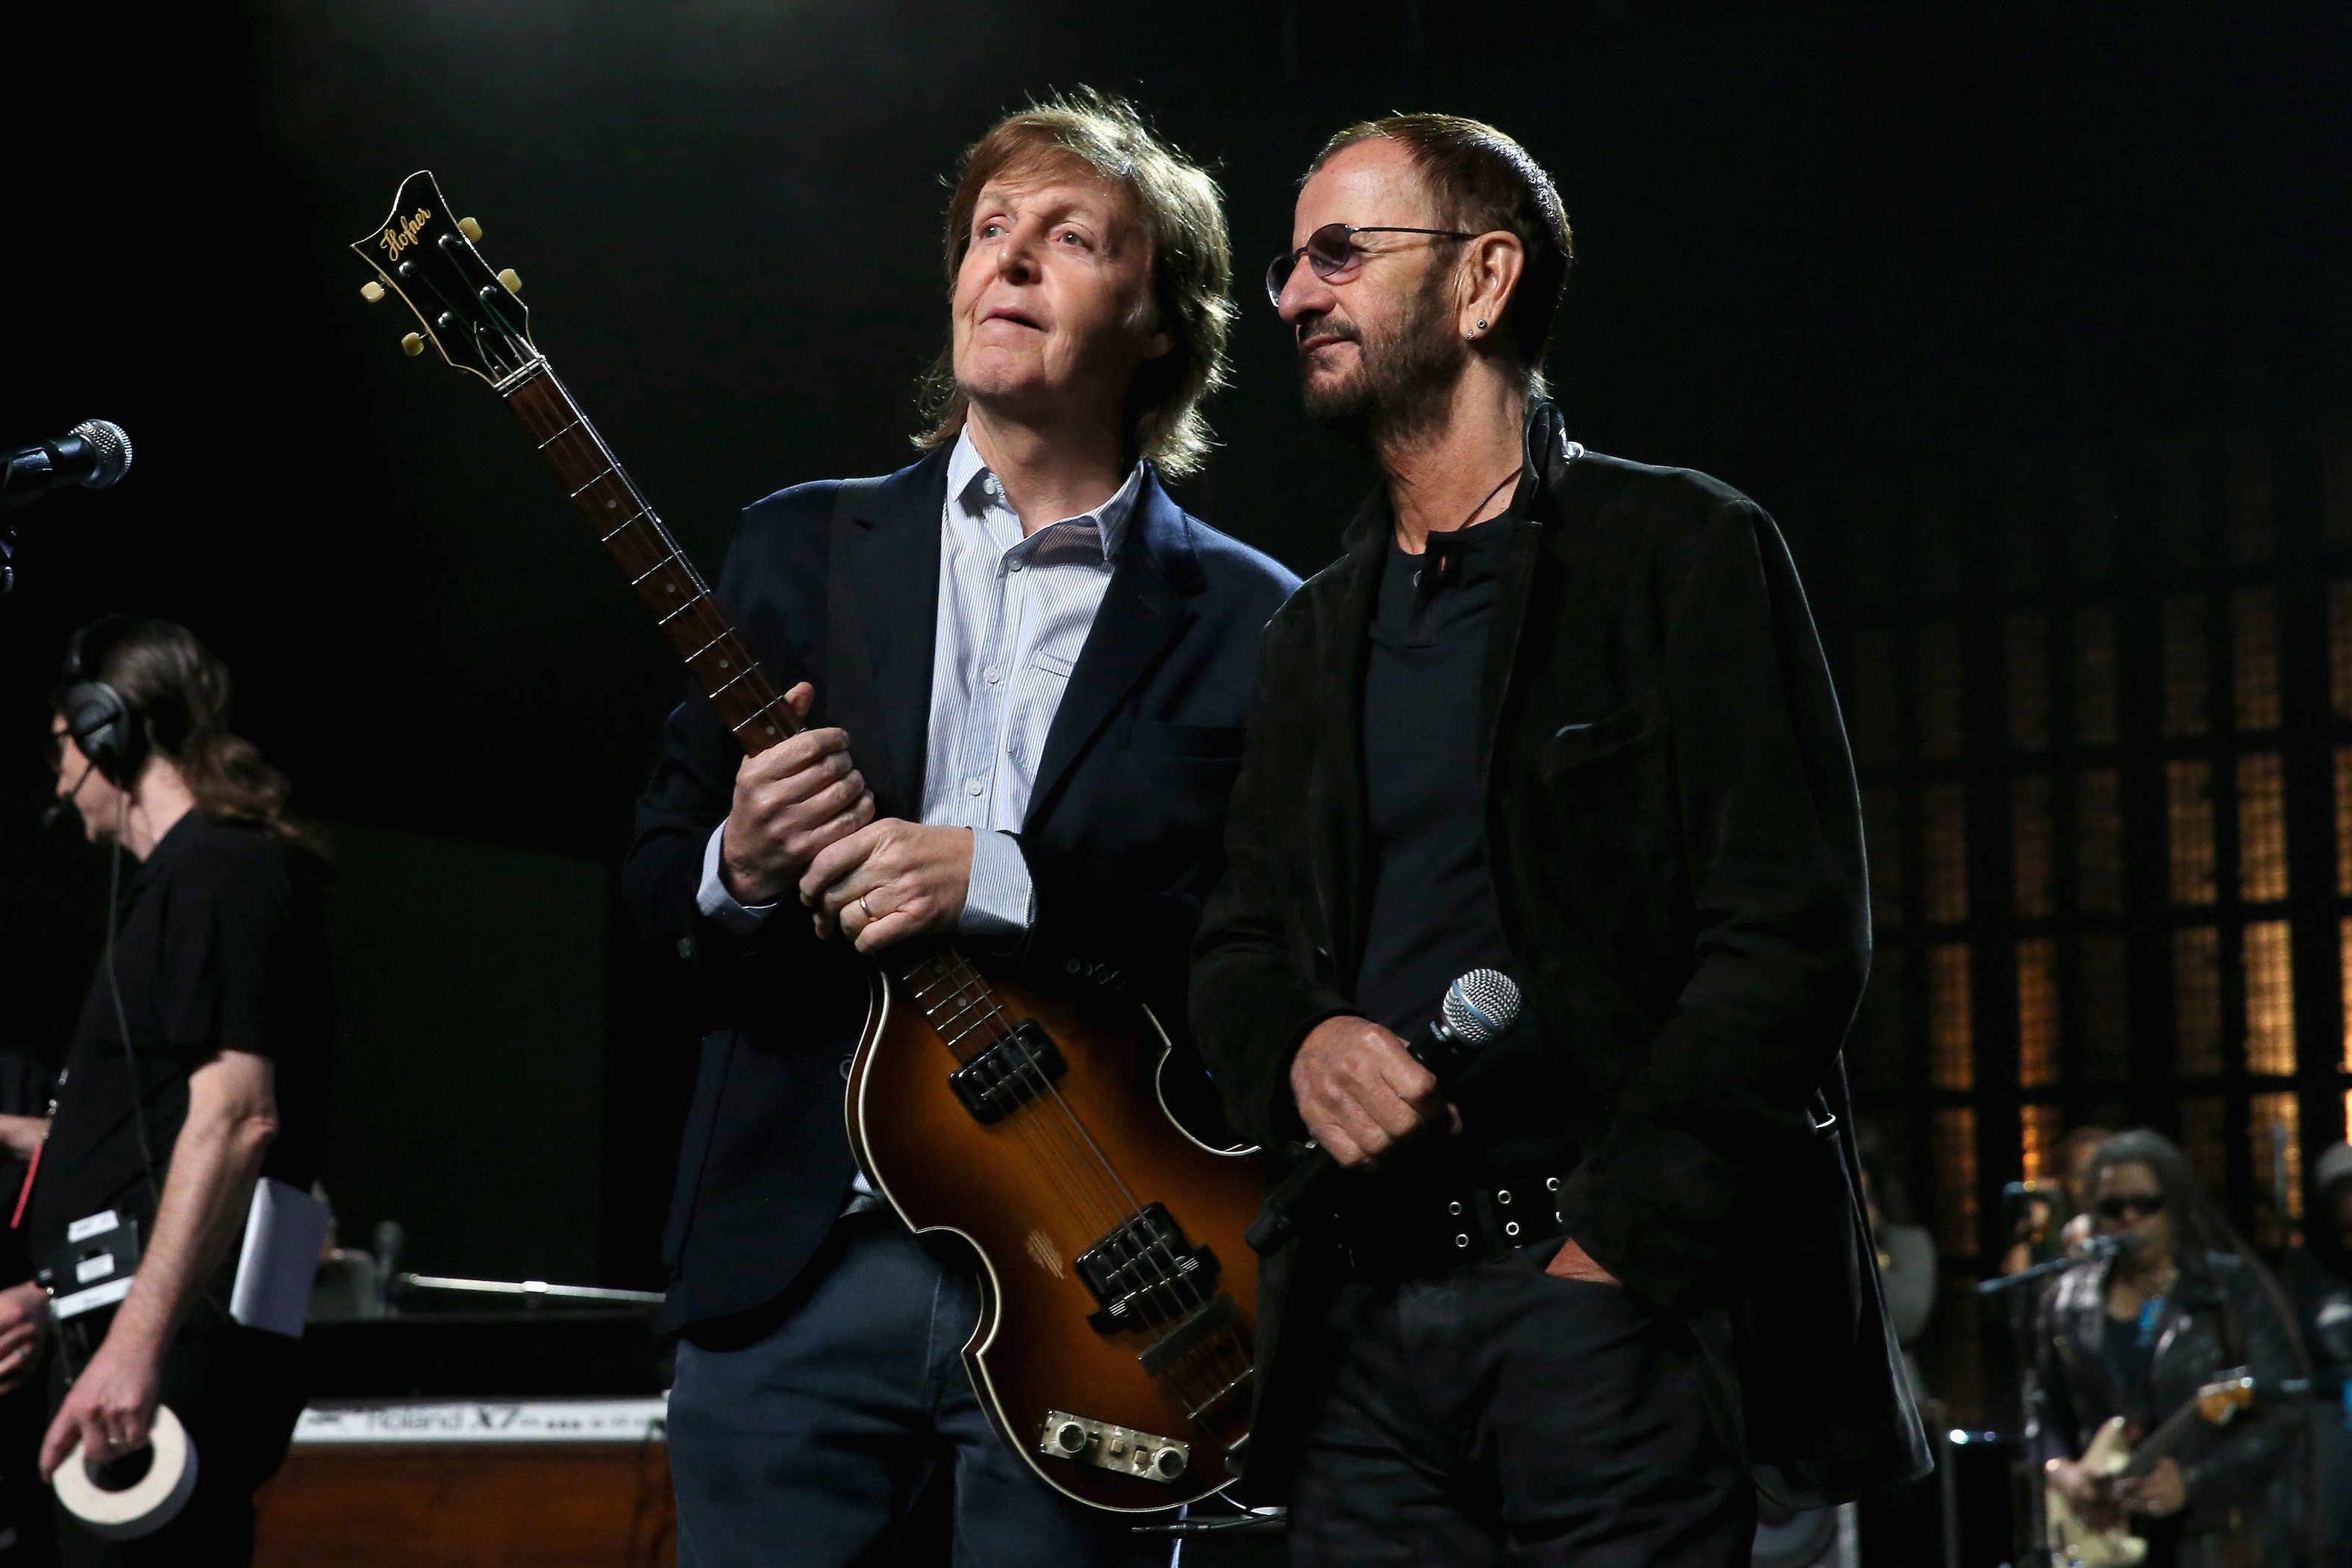 Paul McCartney and Ringo Starr attend the 30th Annual Rock and Roll Hall of Fame Induction Ceremony